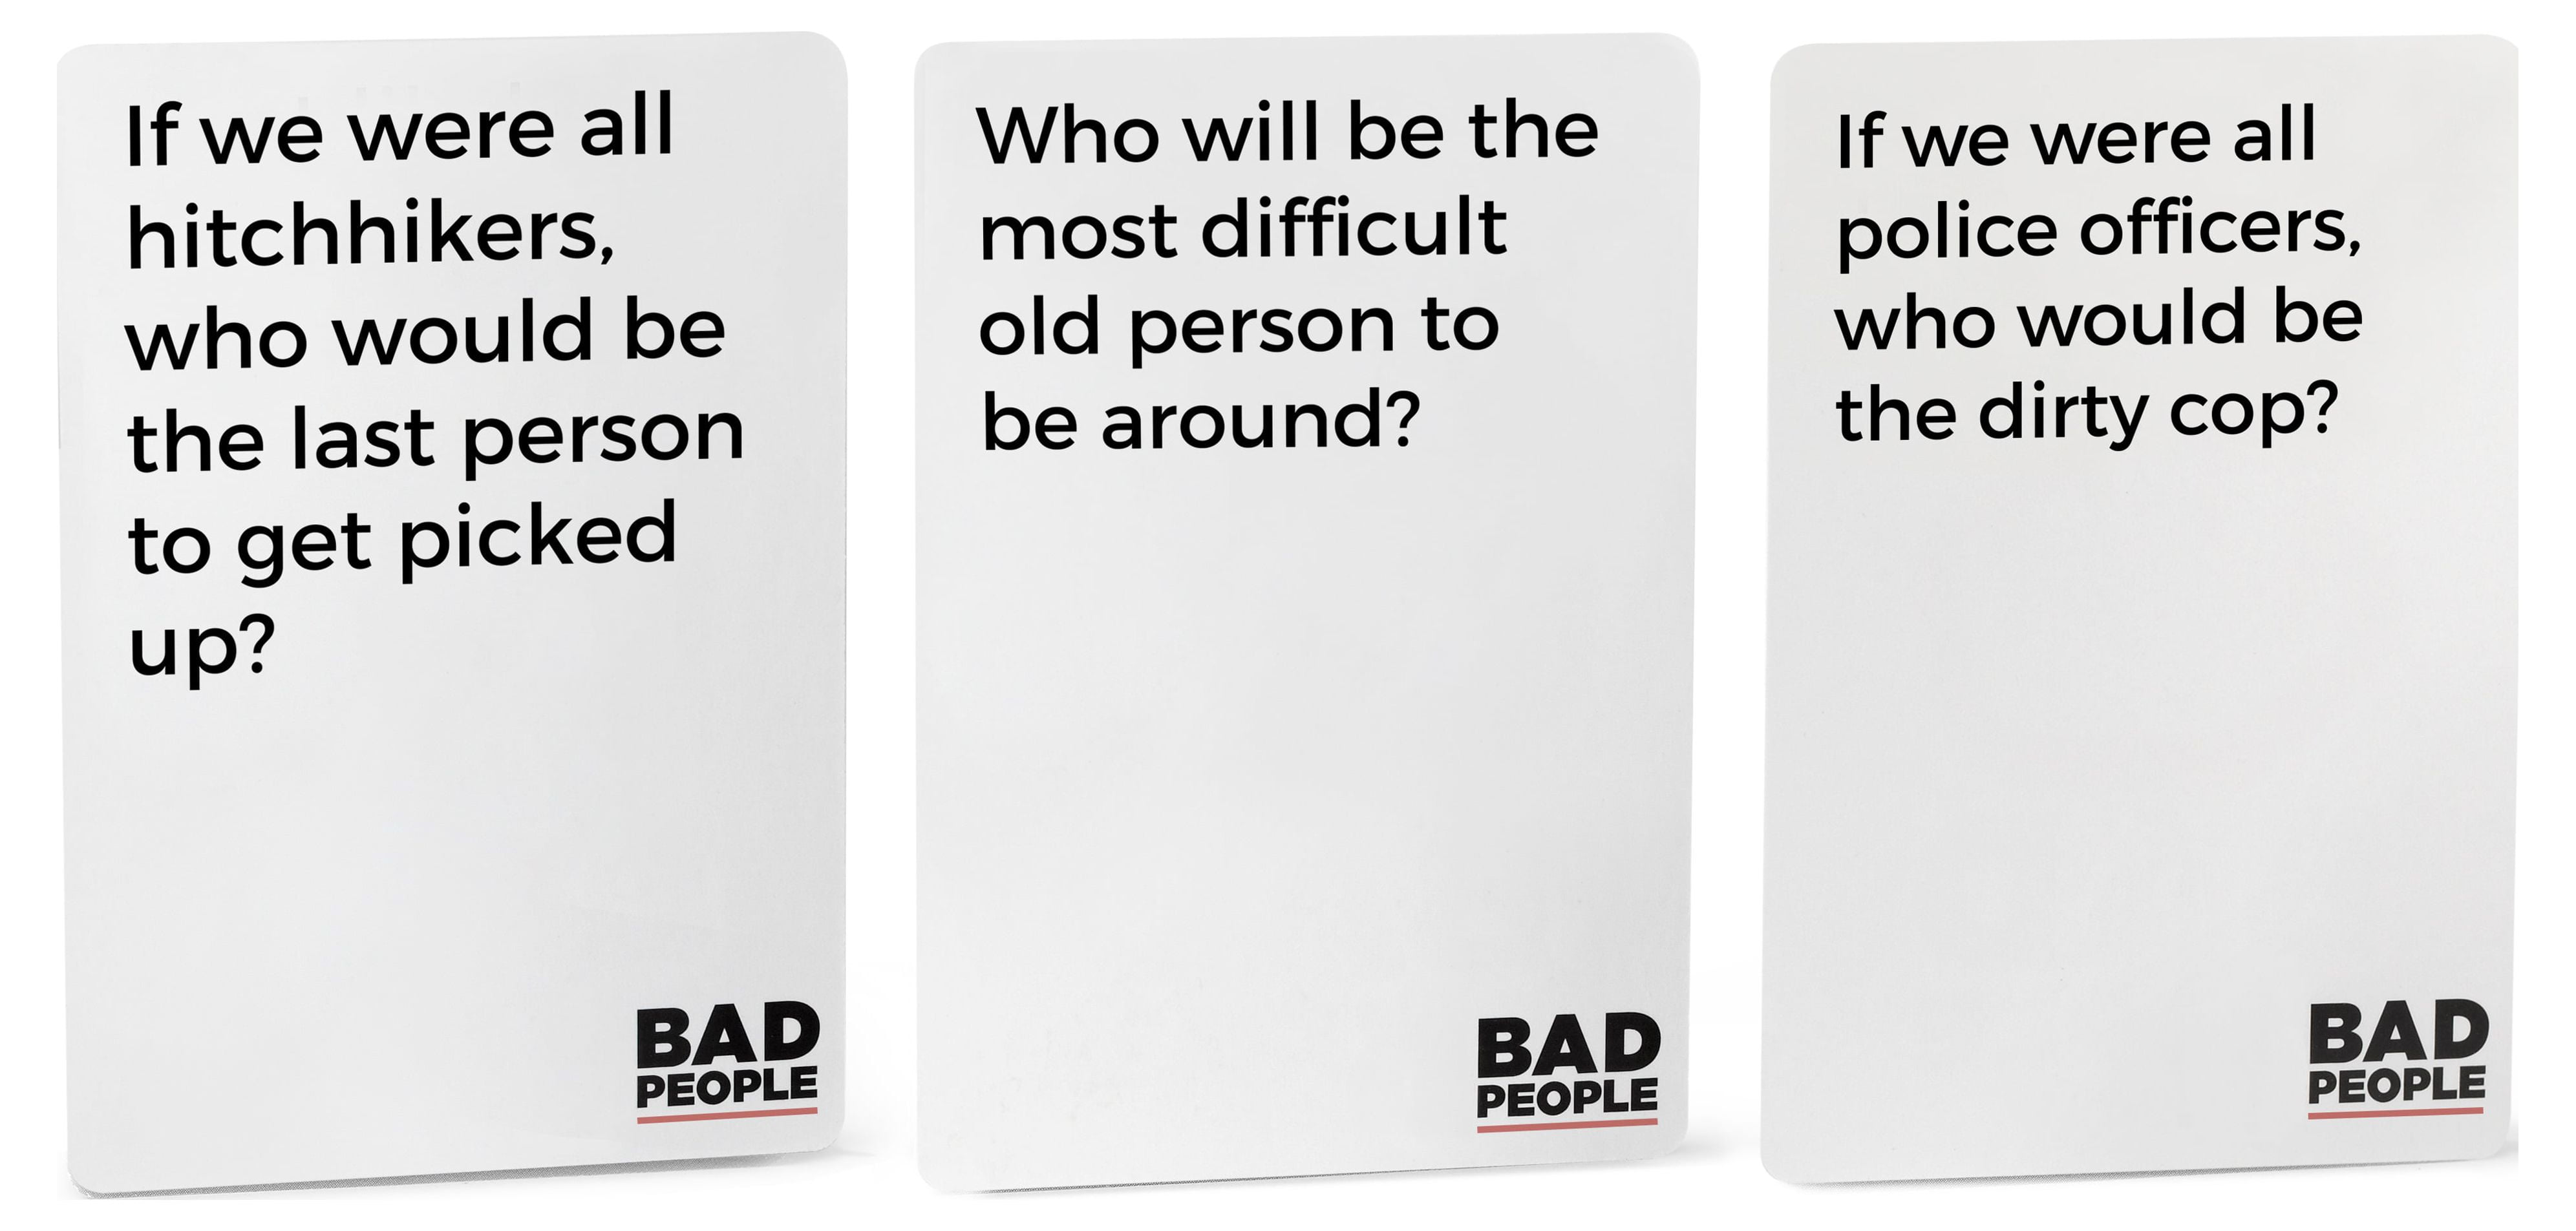 Bad People - The Party Game You Probably Shouldn't Play - Photo